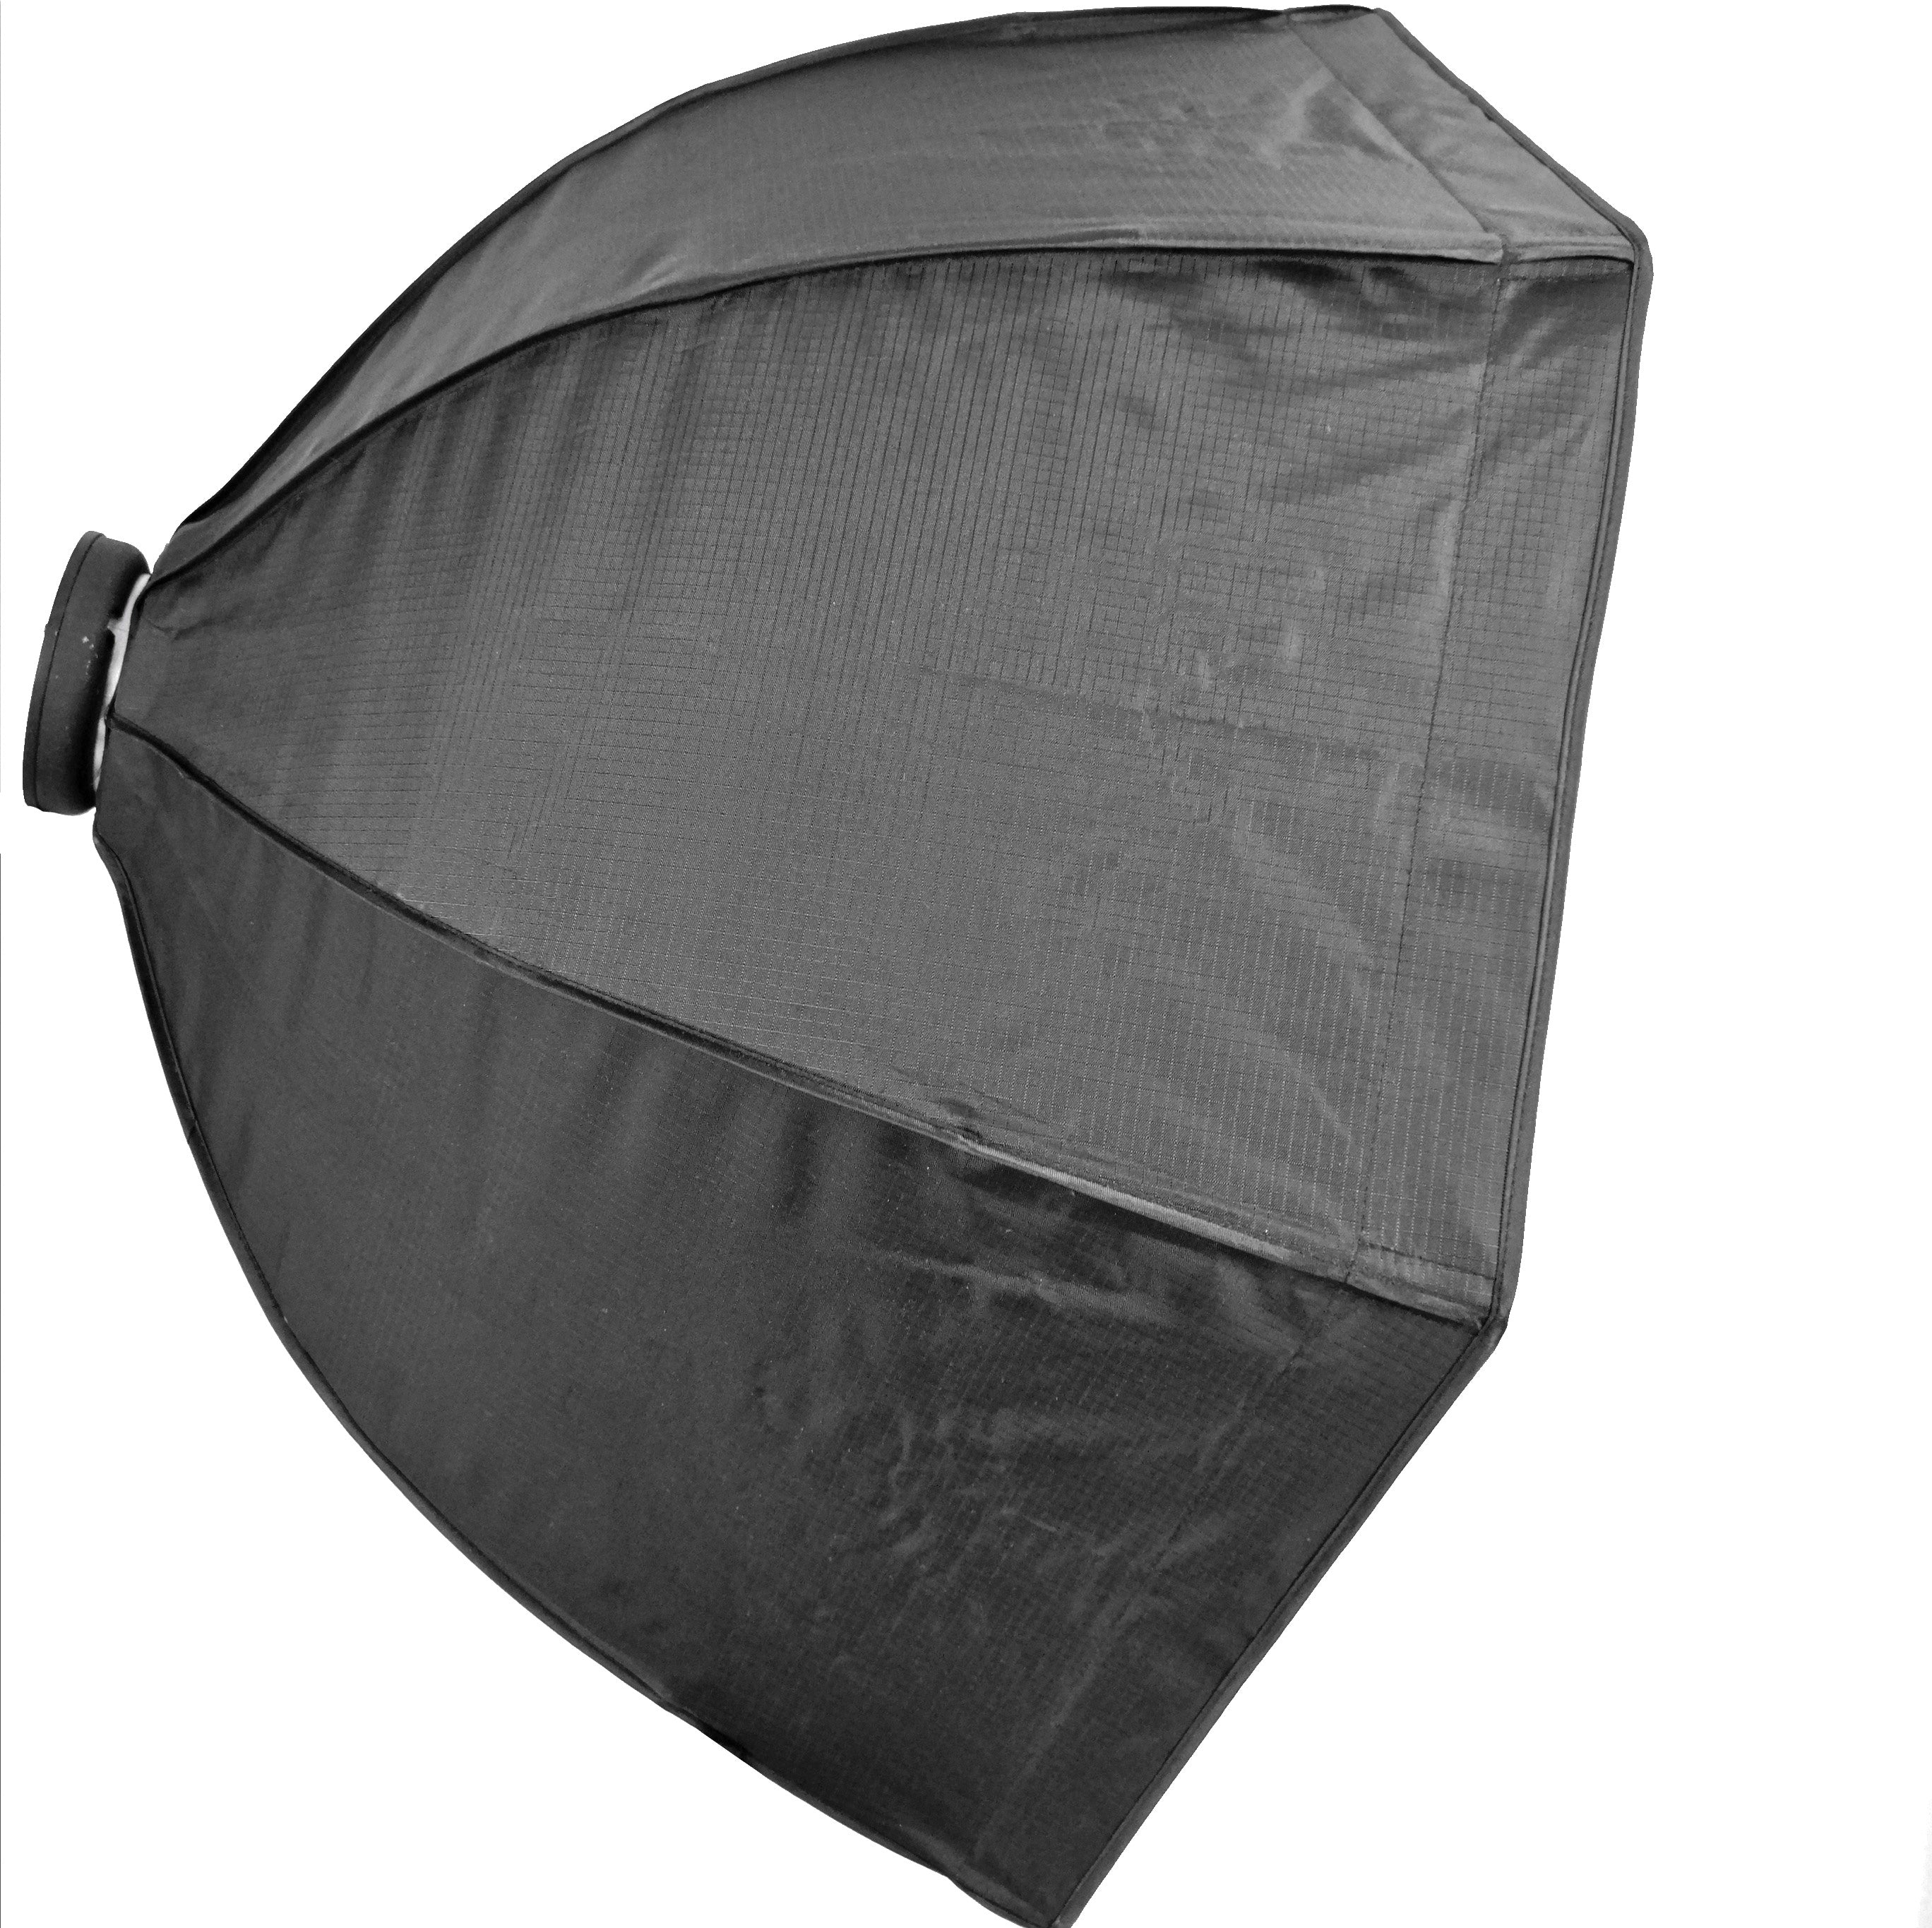 EASY FOLDABLE BEAUTY DISH SOFTBOX 24 INCH WITH GRIDS FOR BOWENS MOUNTS